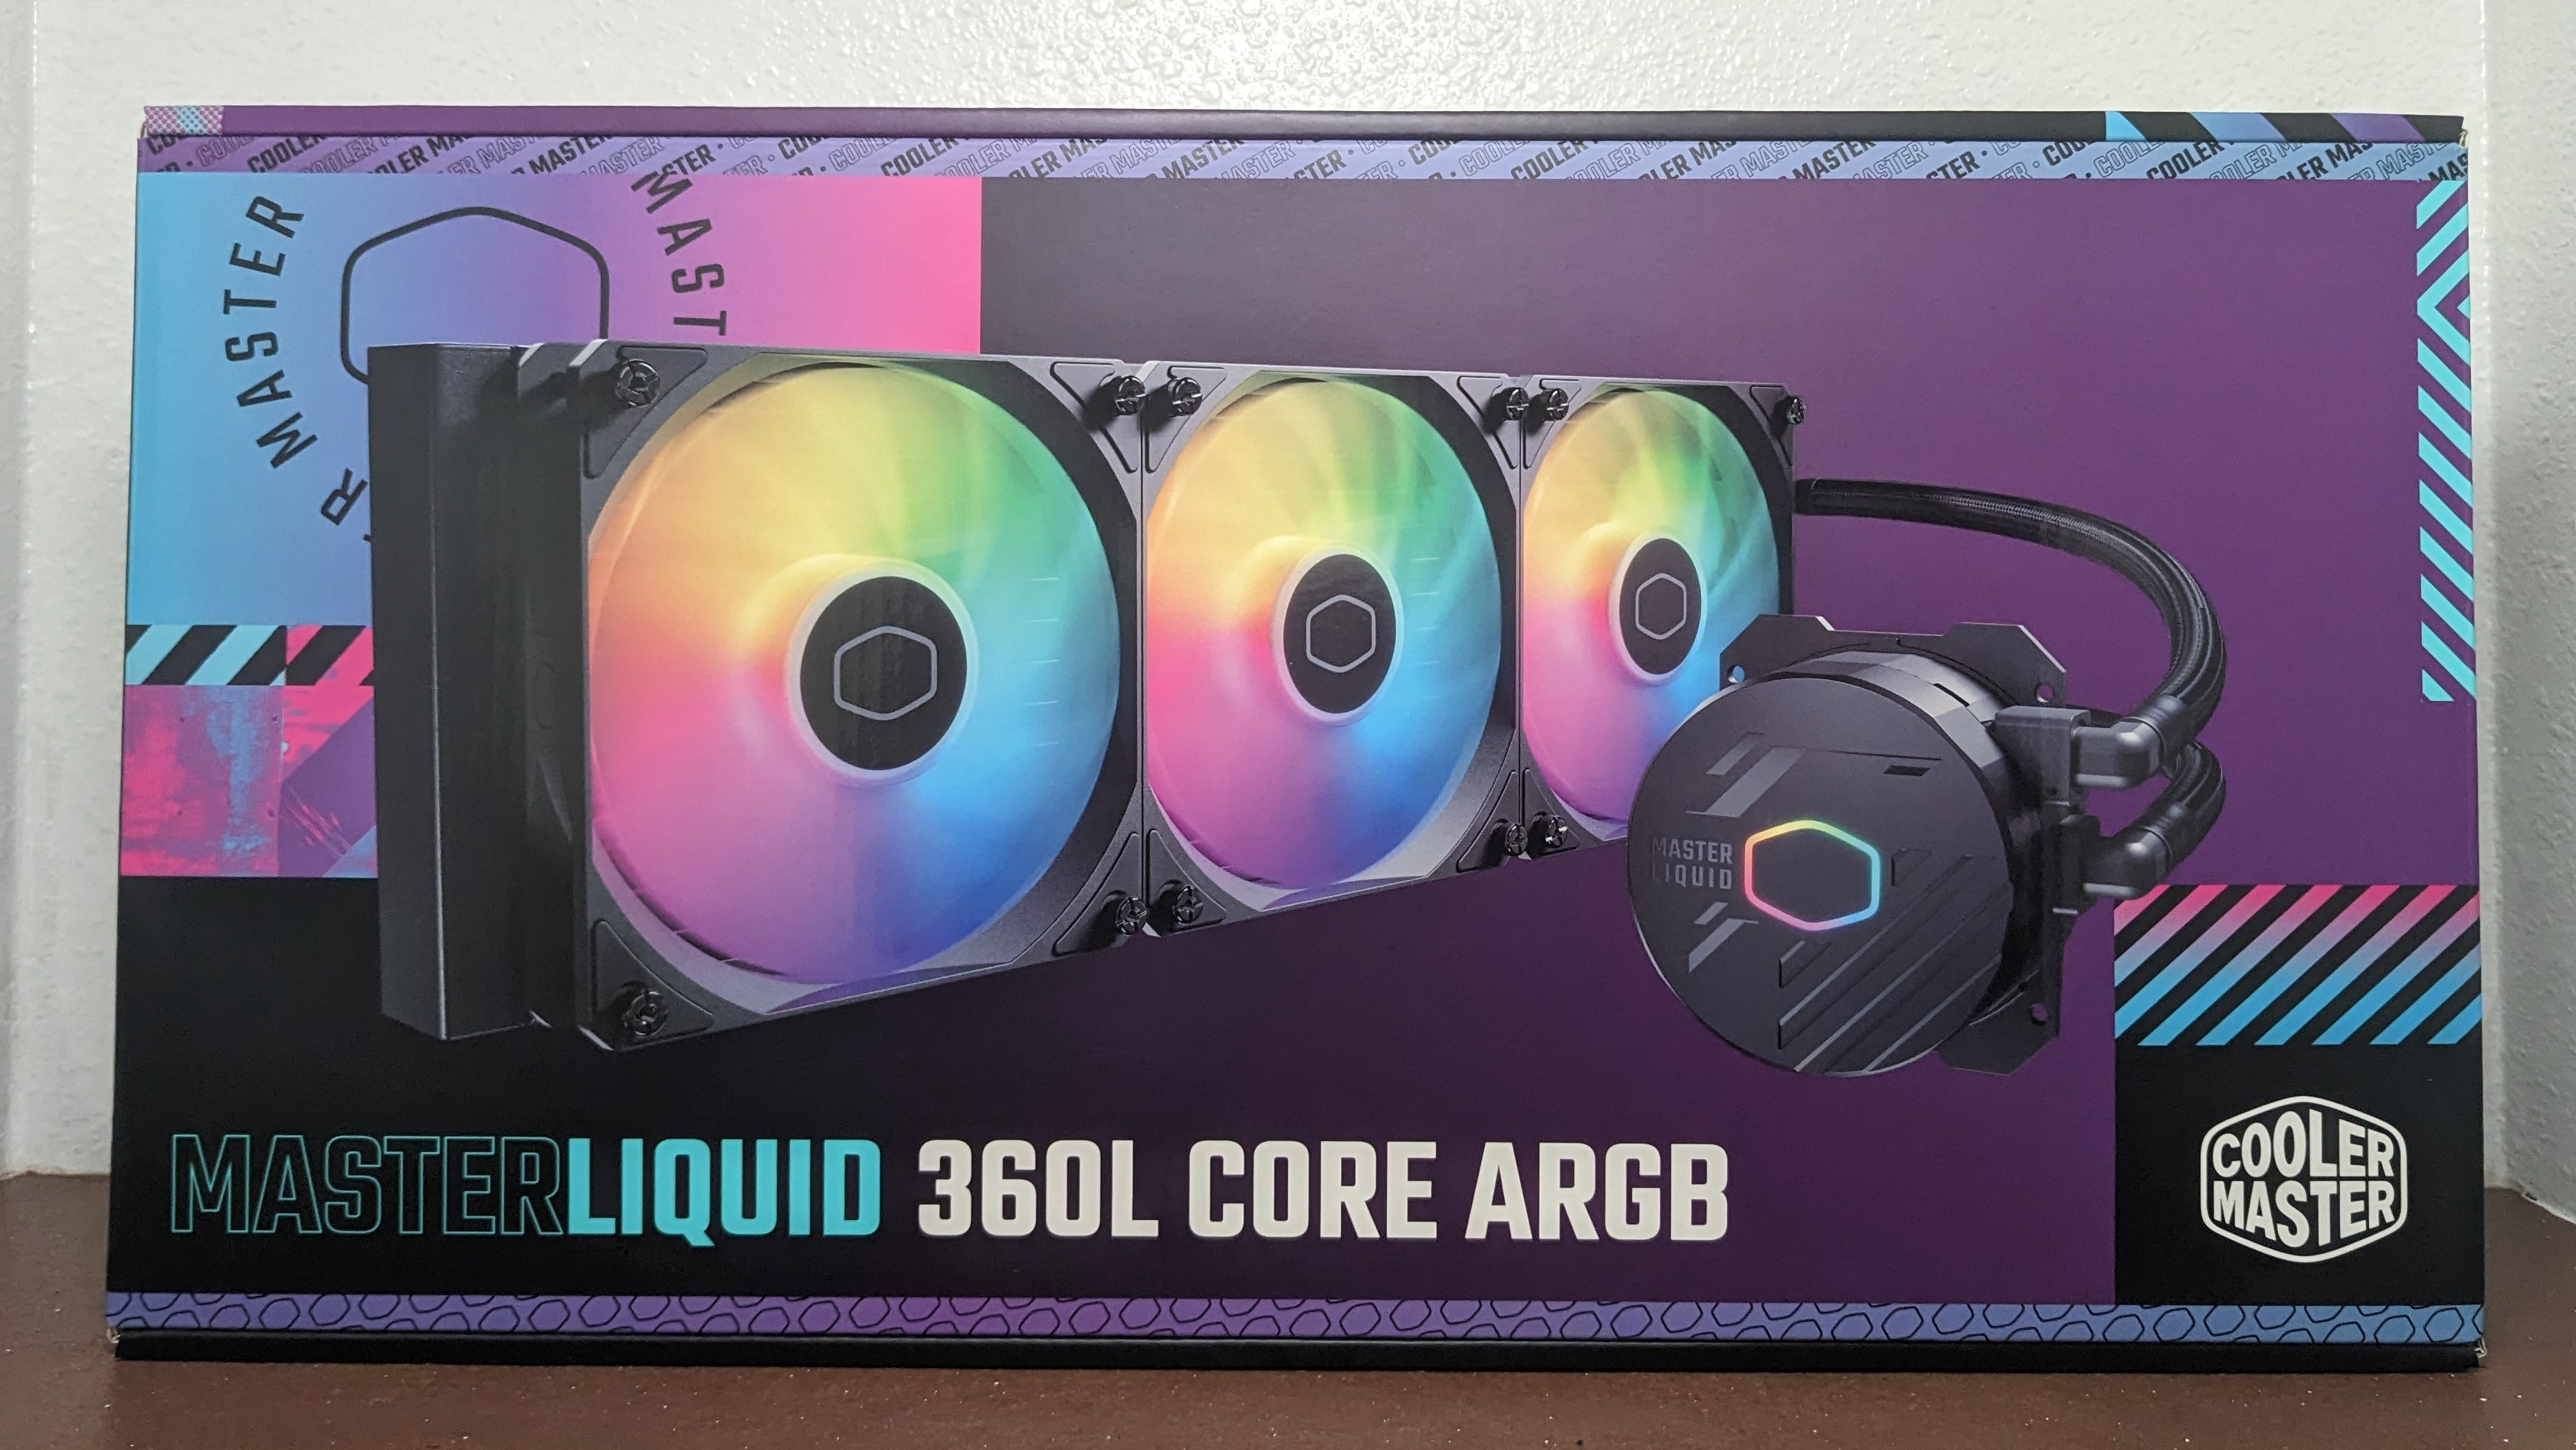 Cooler Master MasterLiquid PL360 Flux 30th Anniversary Edition Review - The  Core I9's Worthy Opponent –